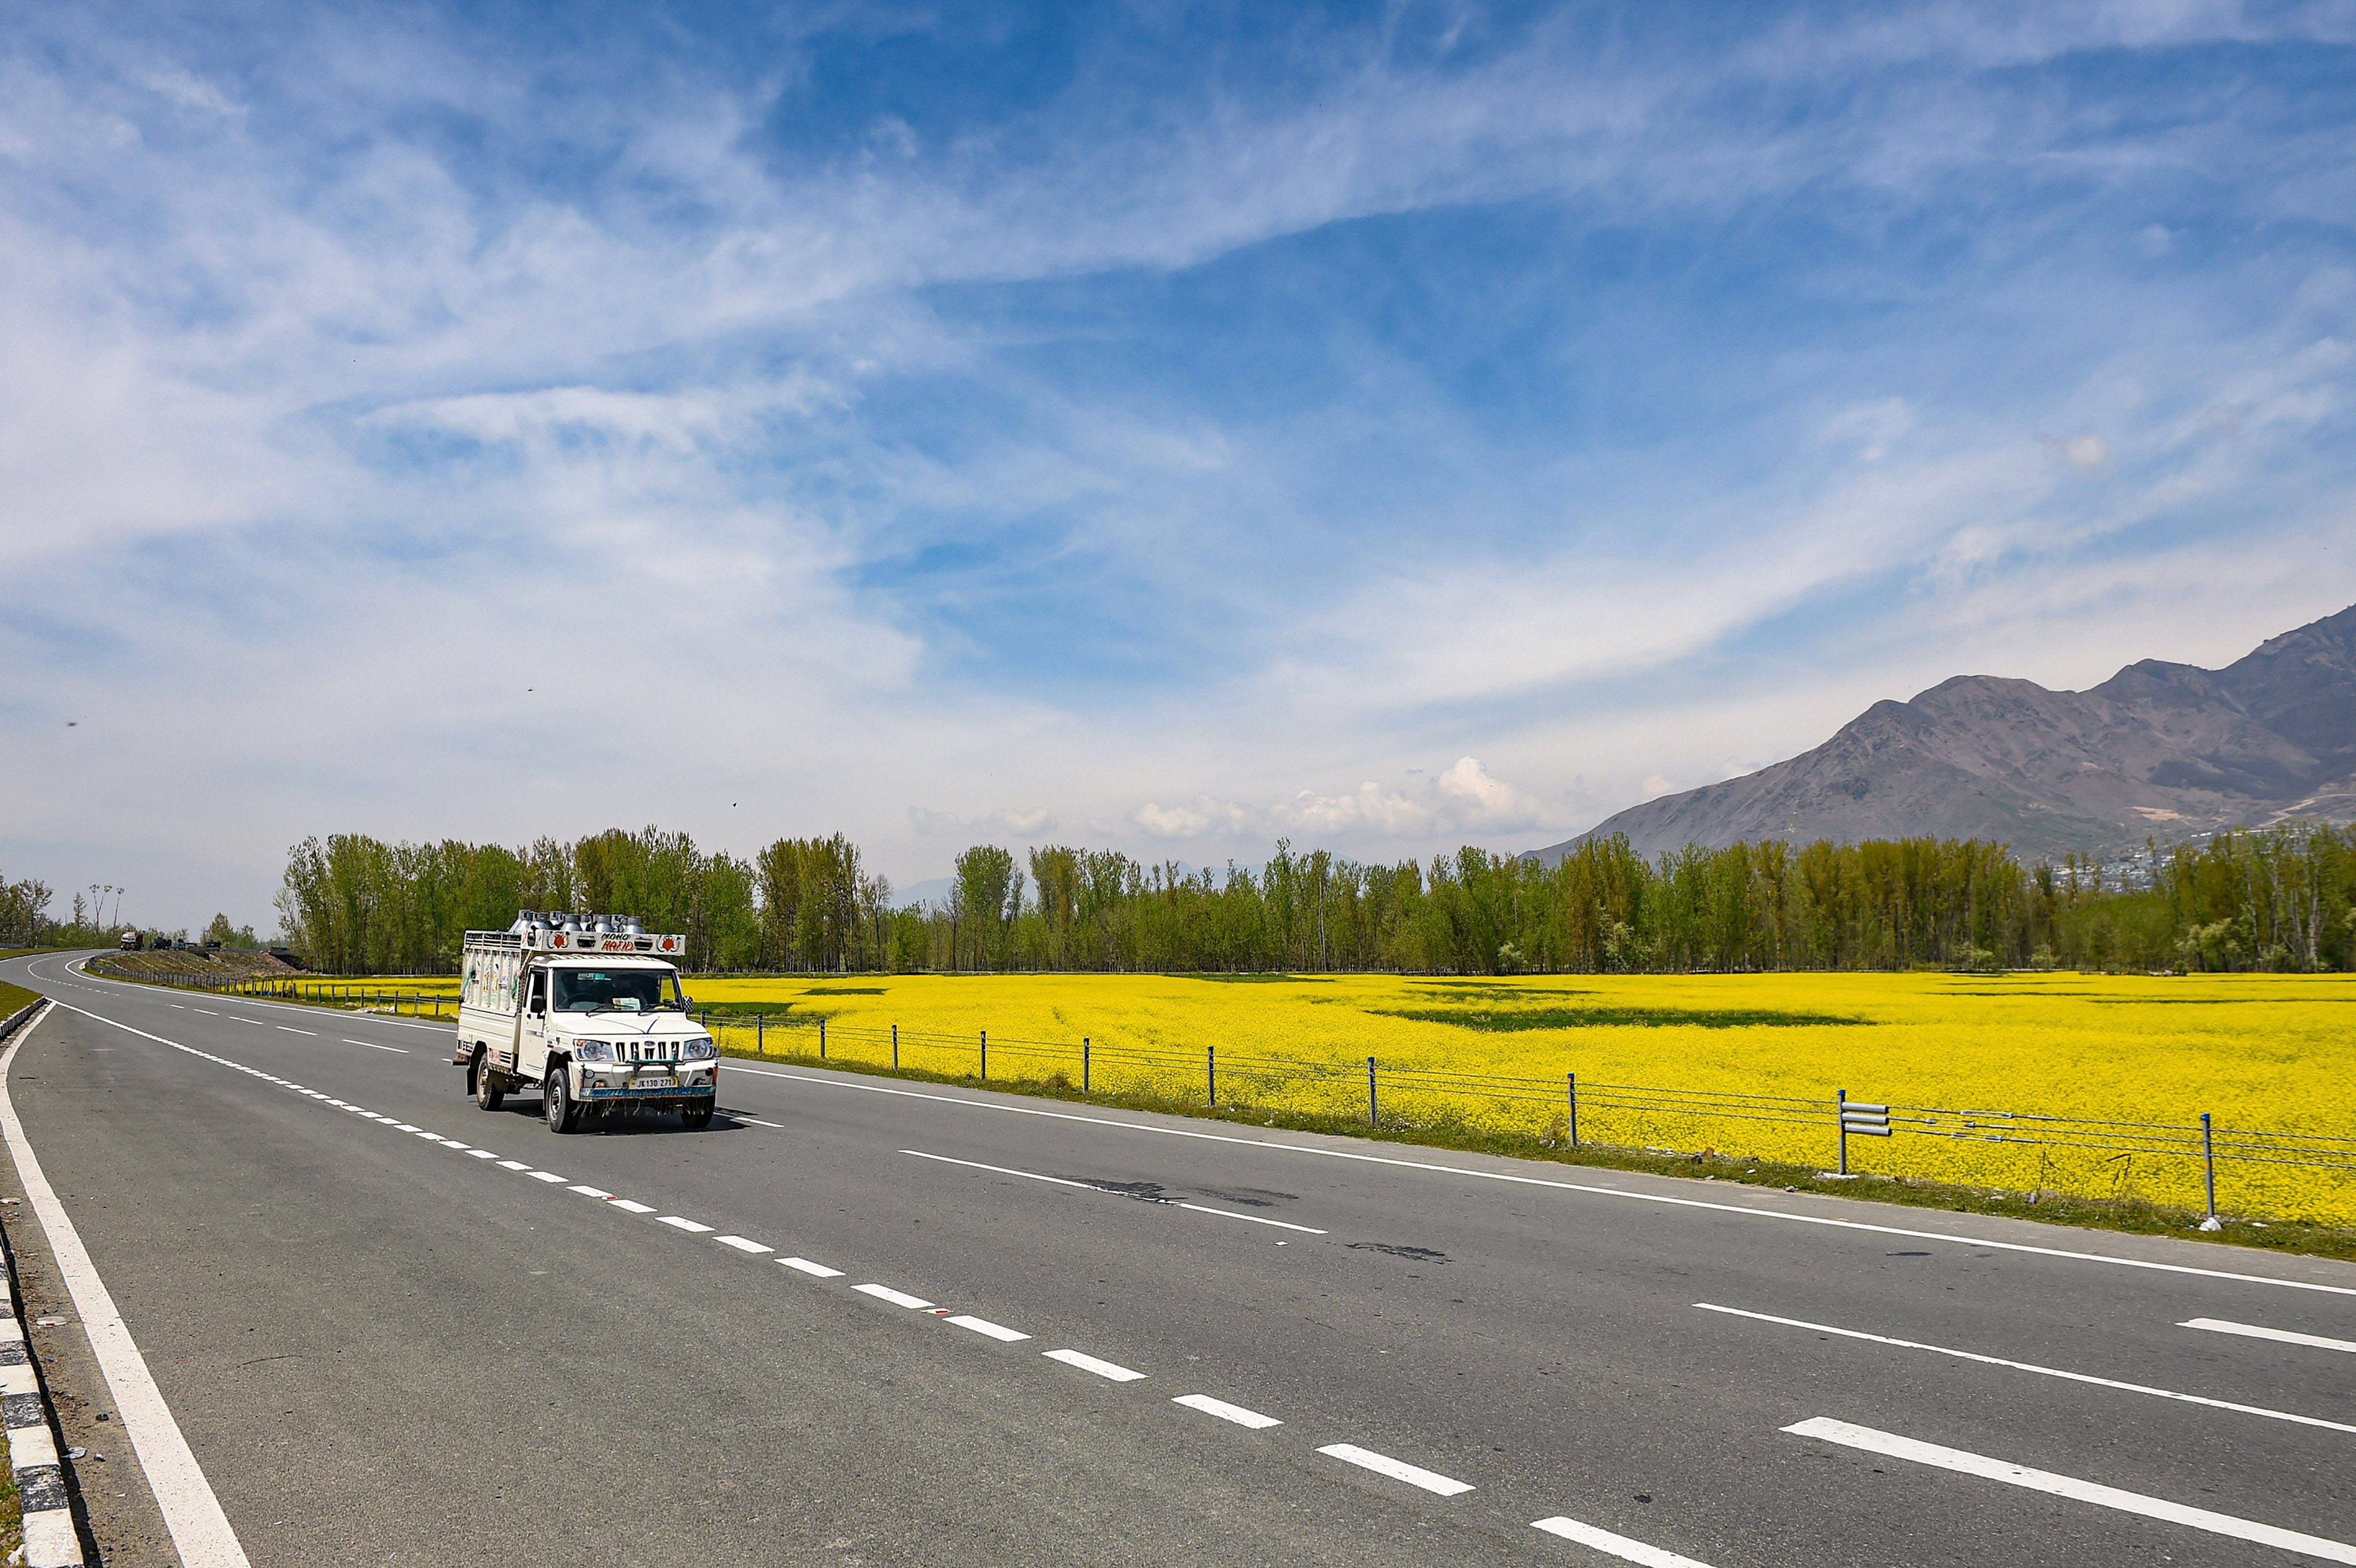 A vehicle carrying diary products runs on the deserted Srinagar-Jammu National Highway during the nationwide lockdown to curb the spread of coronavirus, in the outskirts of Srinagar. (Credit: PTI Photo)